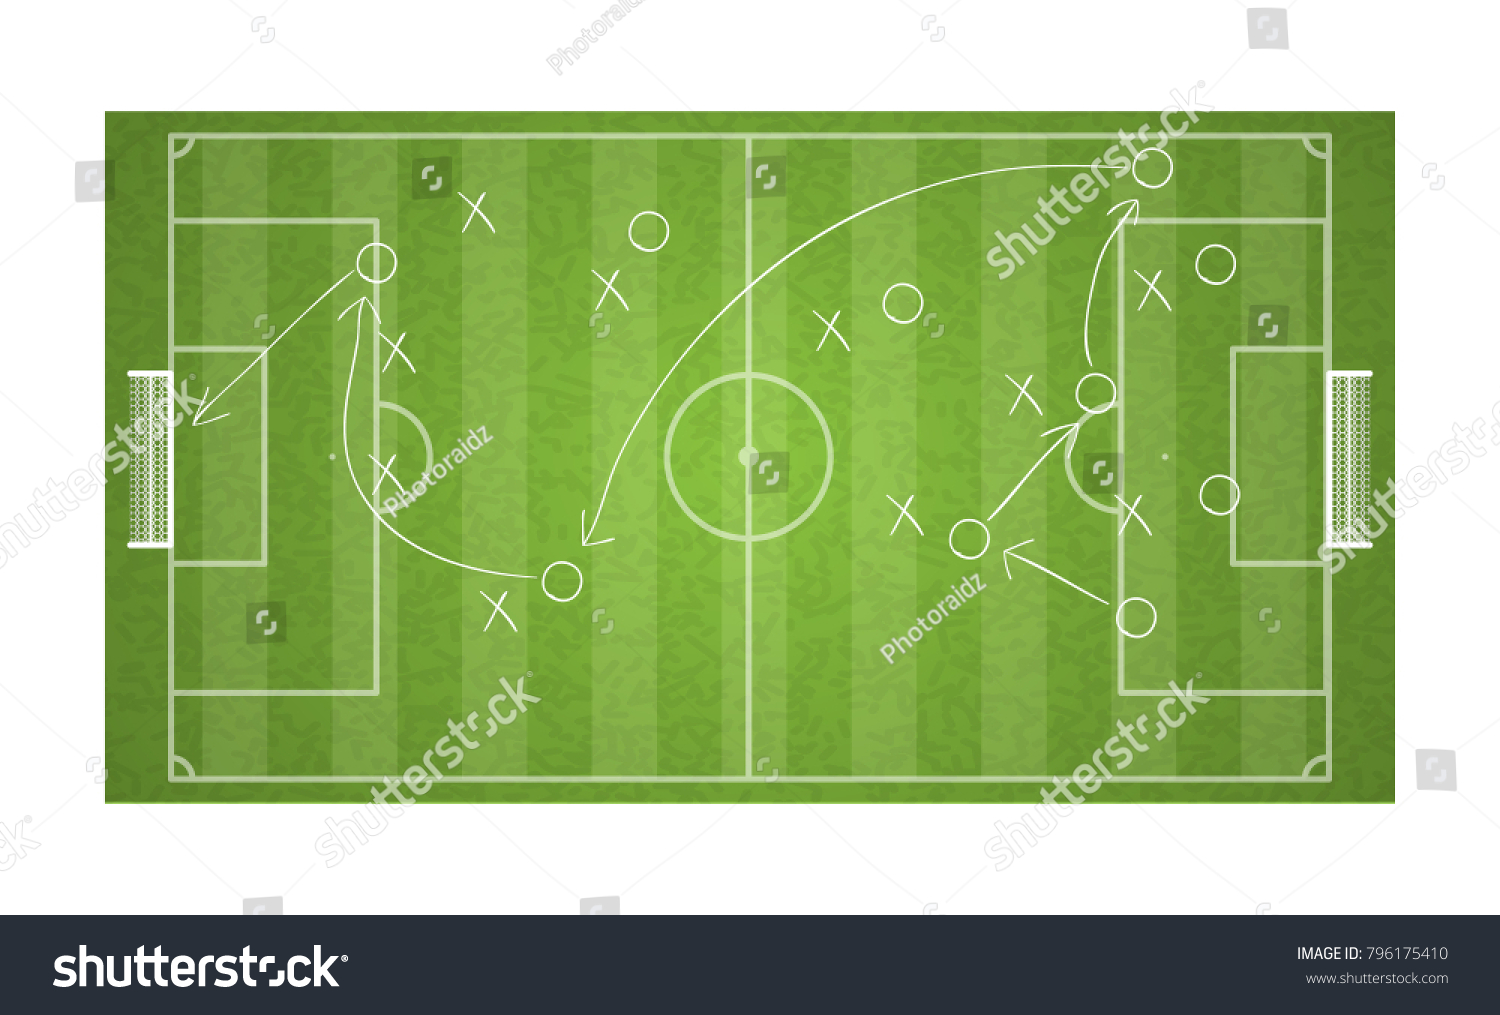 Top View Football Field Drawing Soccer Stock Vector (Royalty Free